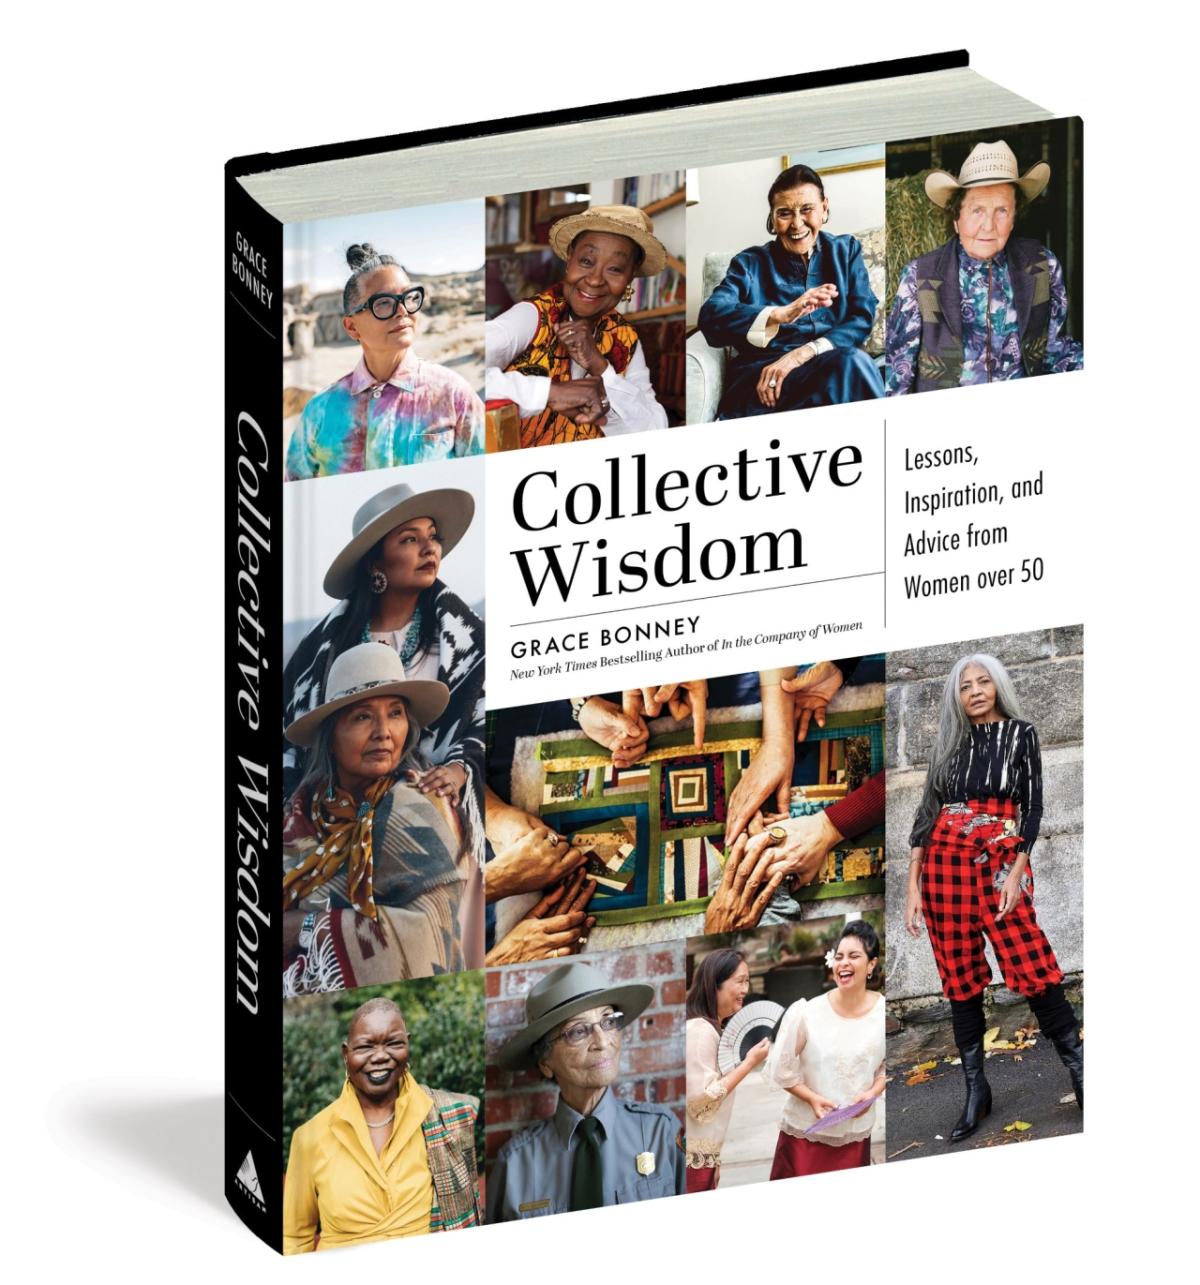 "Collective Wisdom: Lessons Inspiration, and Advice from Women Over 50" by Grace Bonney